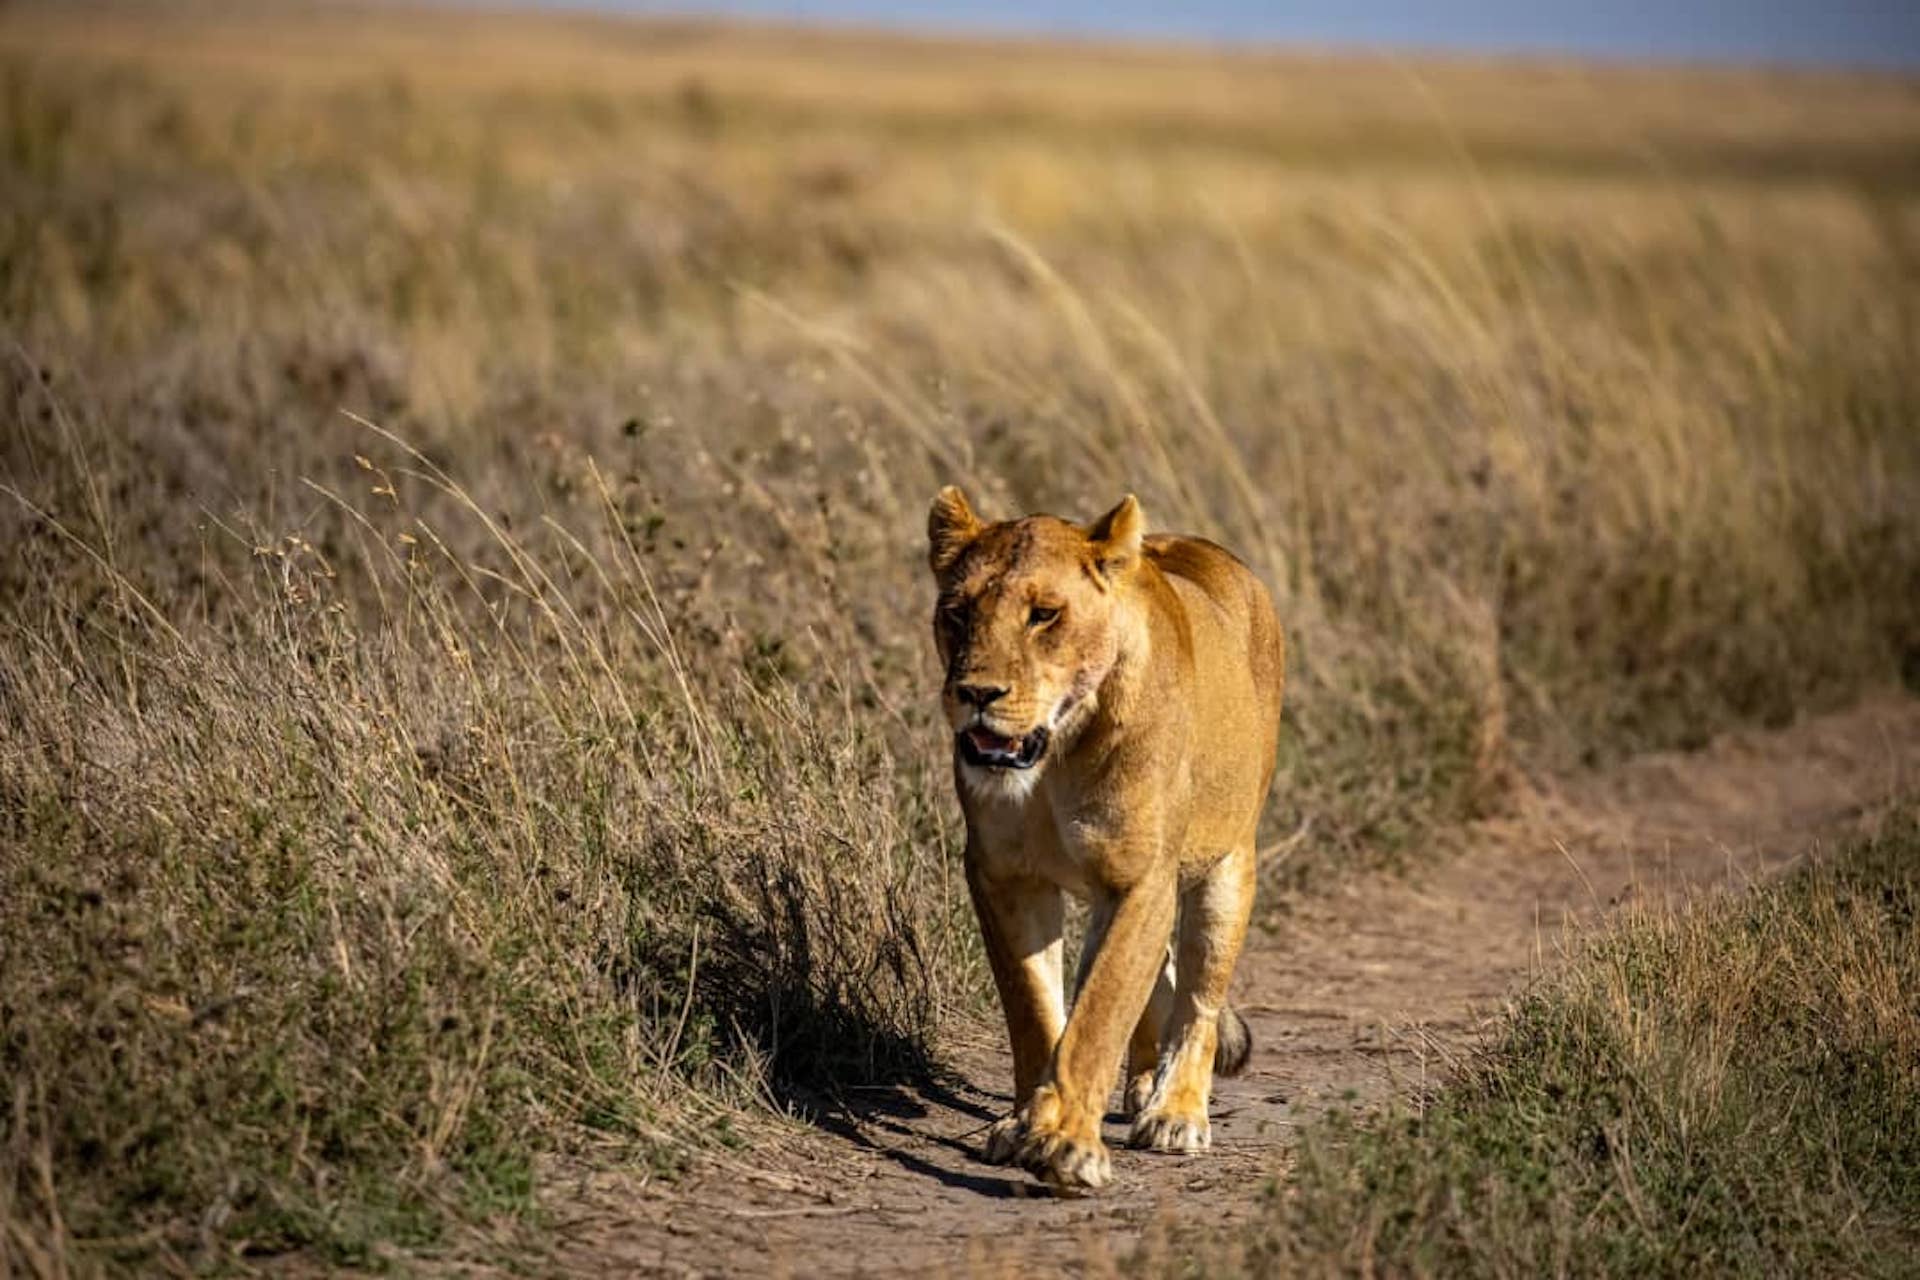 Lion on the move in the Serengeti with World Adventure Tours